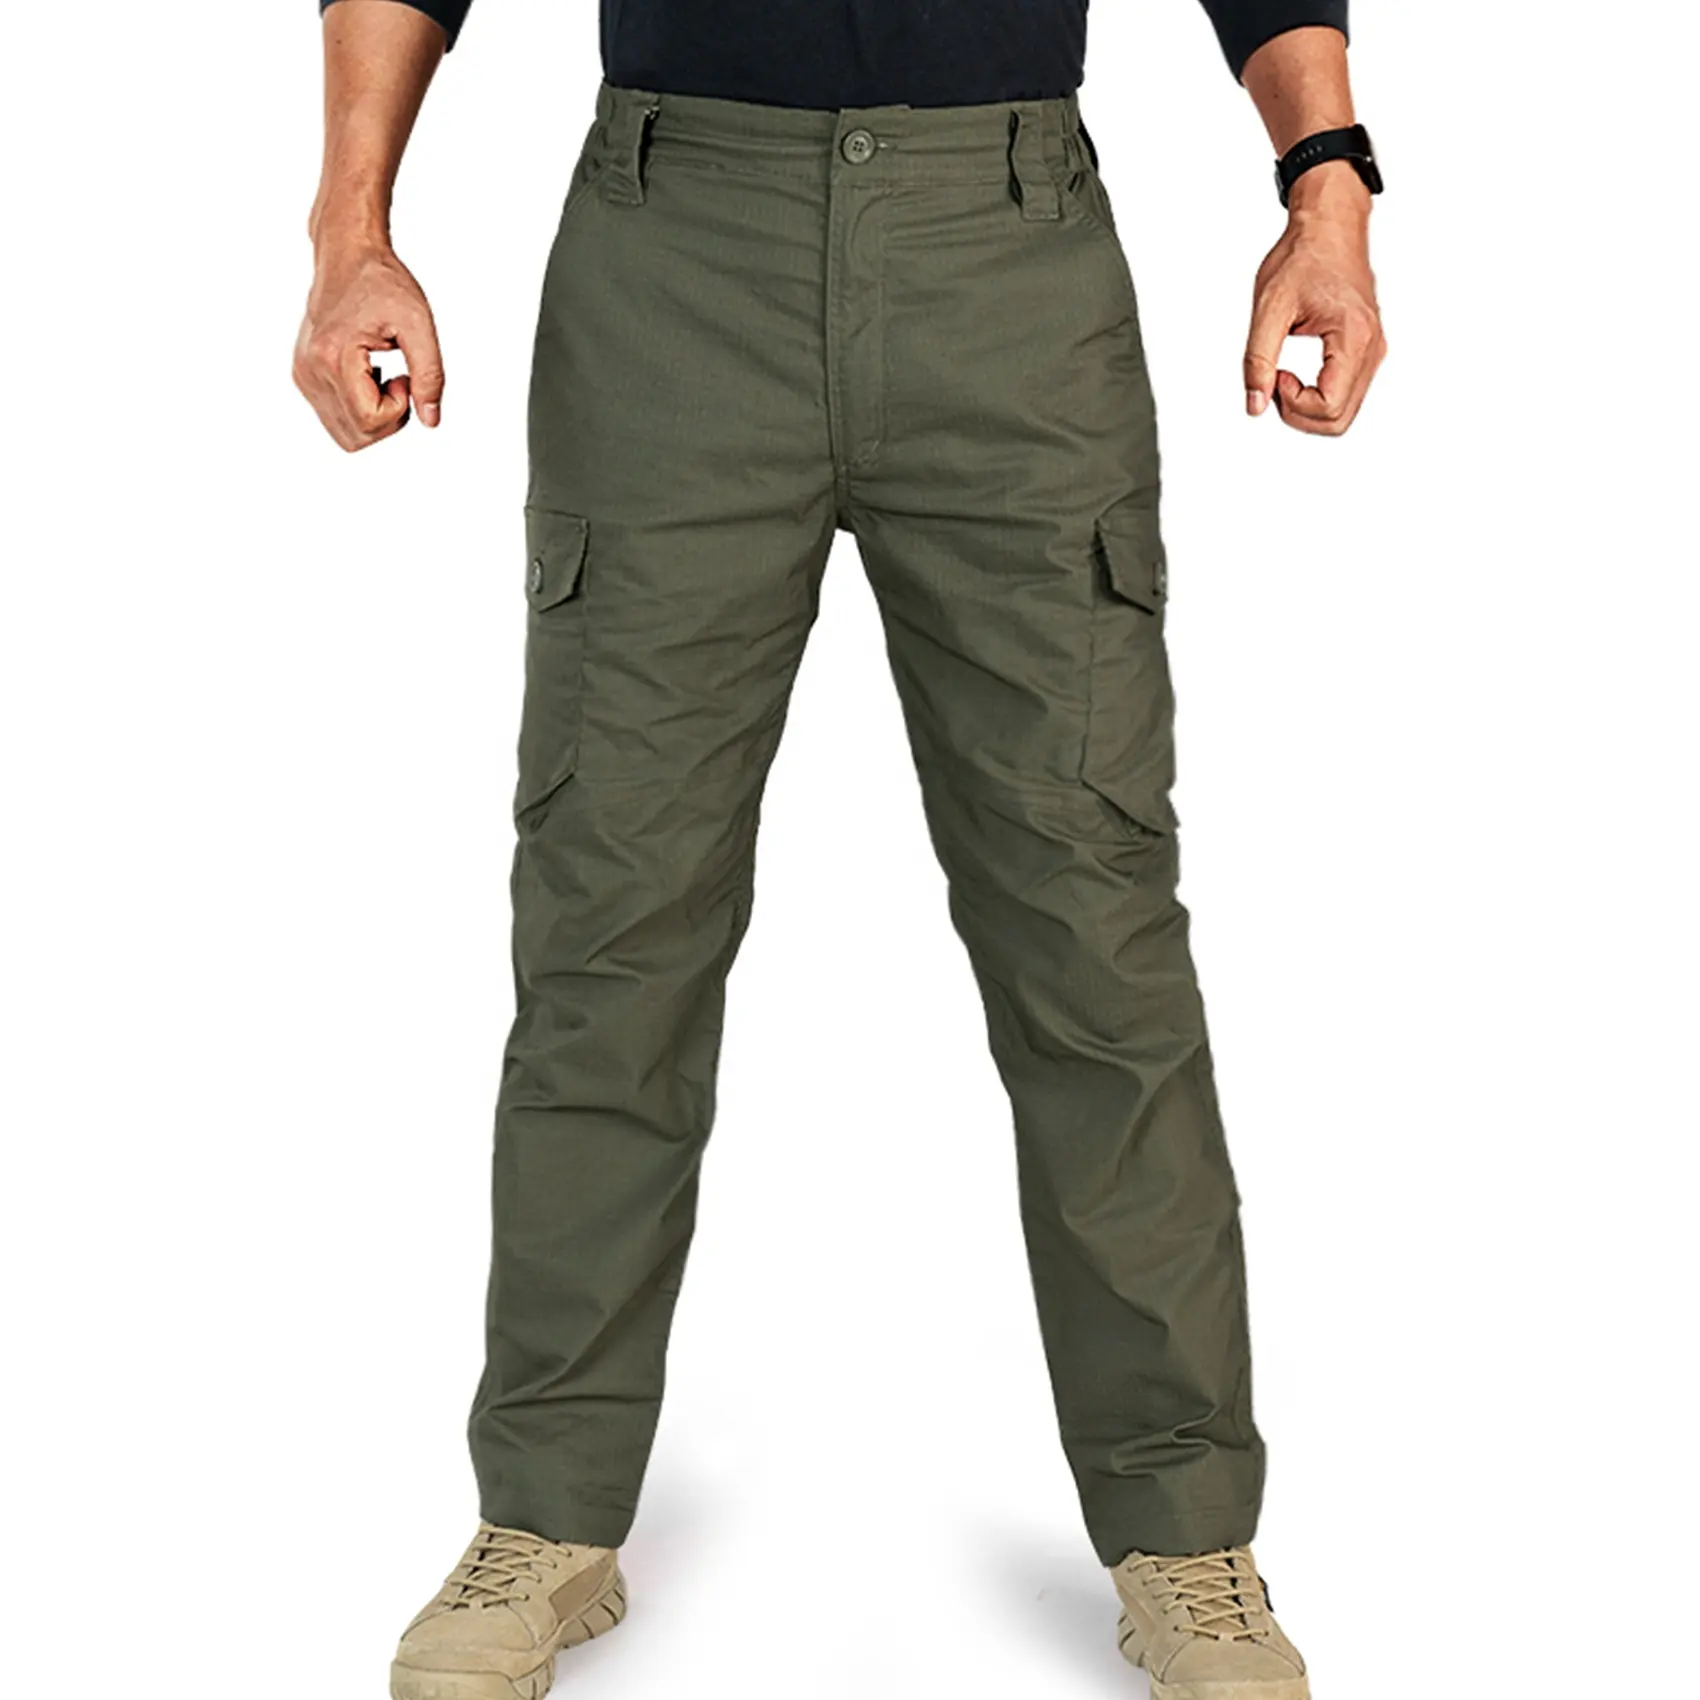 Urban Trousers High Quality Tactical Gear Pants Sweat Pant Apparel Stock Trousers For Men